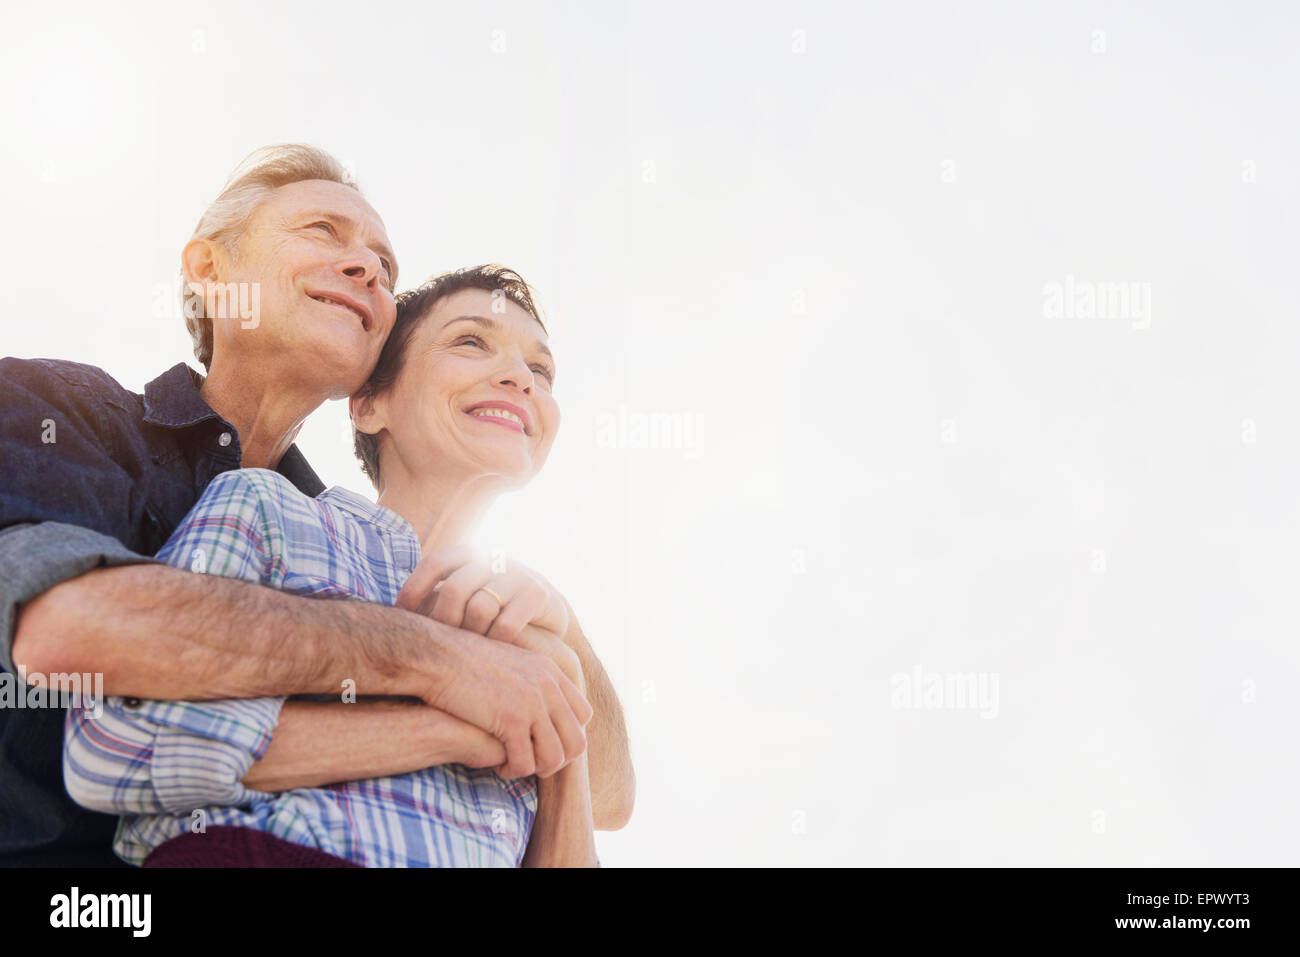 Happy senior couple embracing in sunlight Banque D'Images